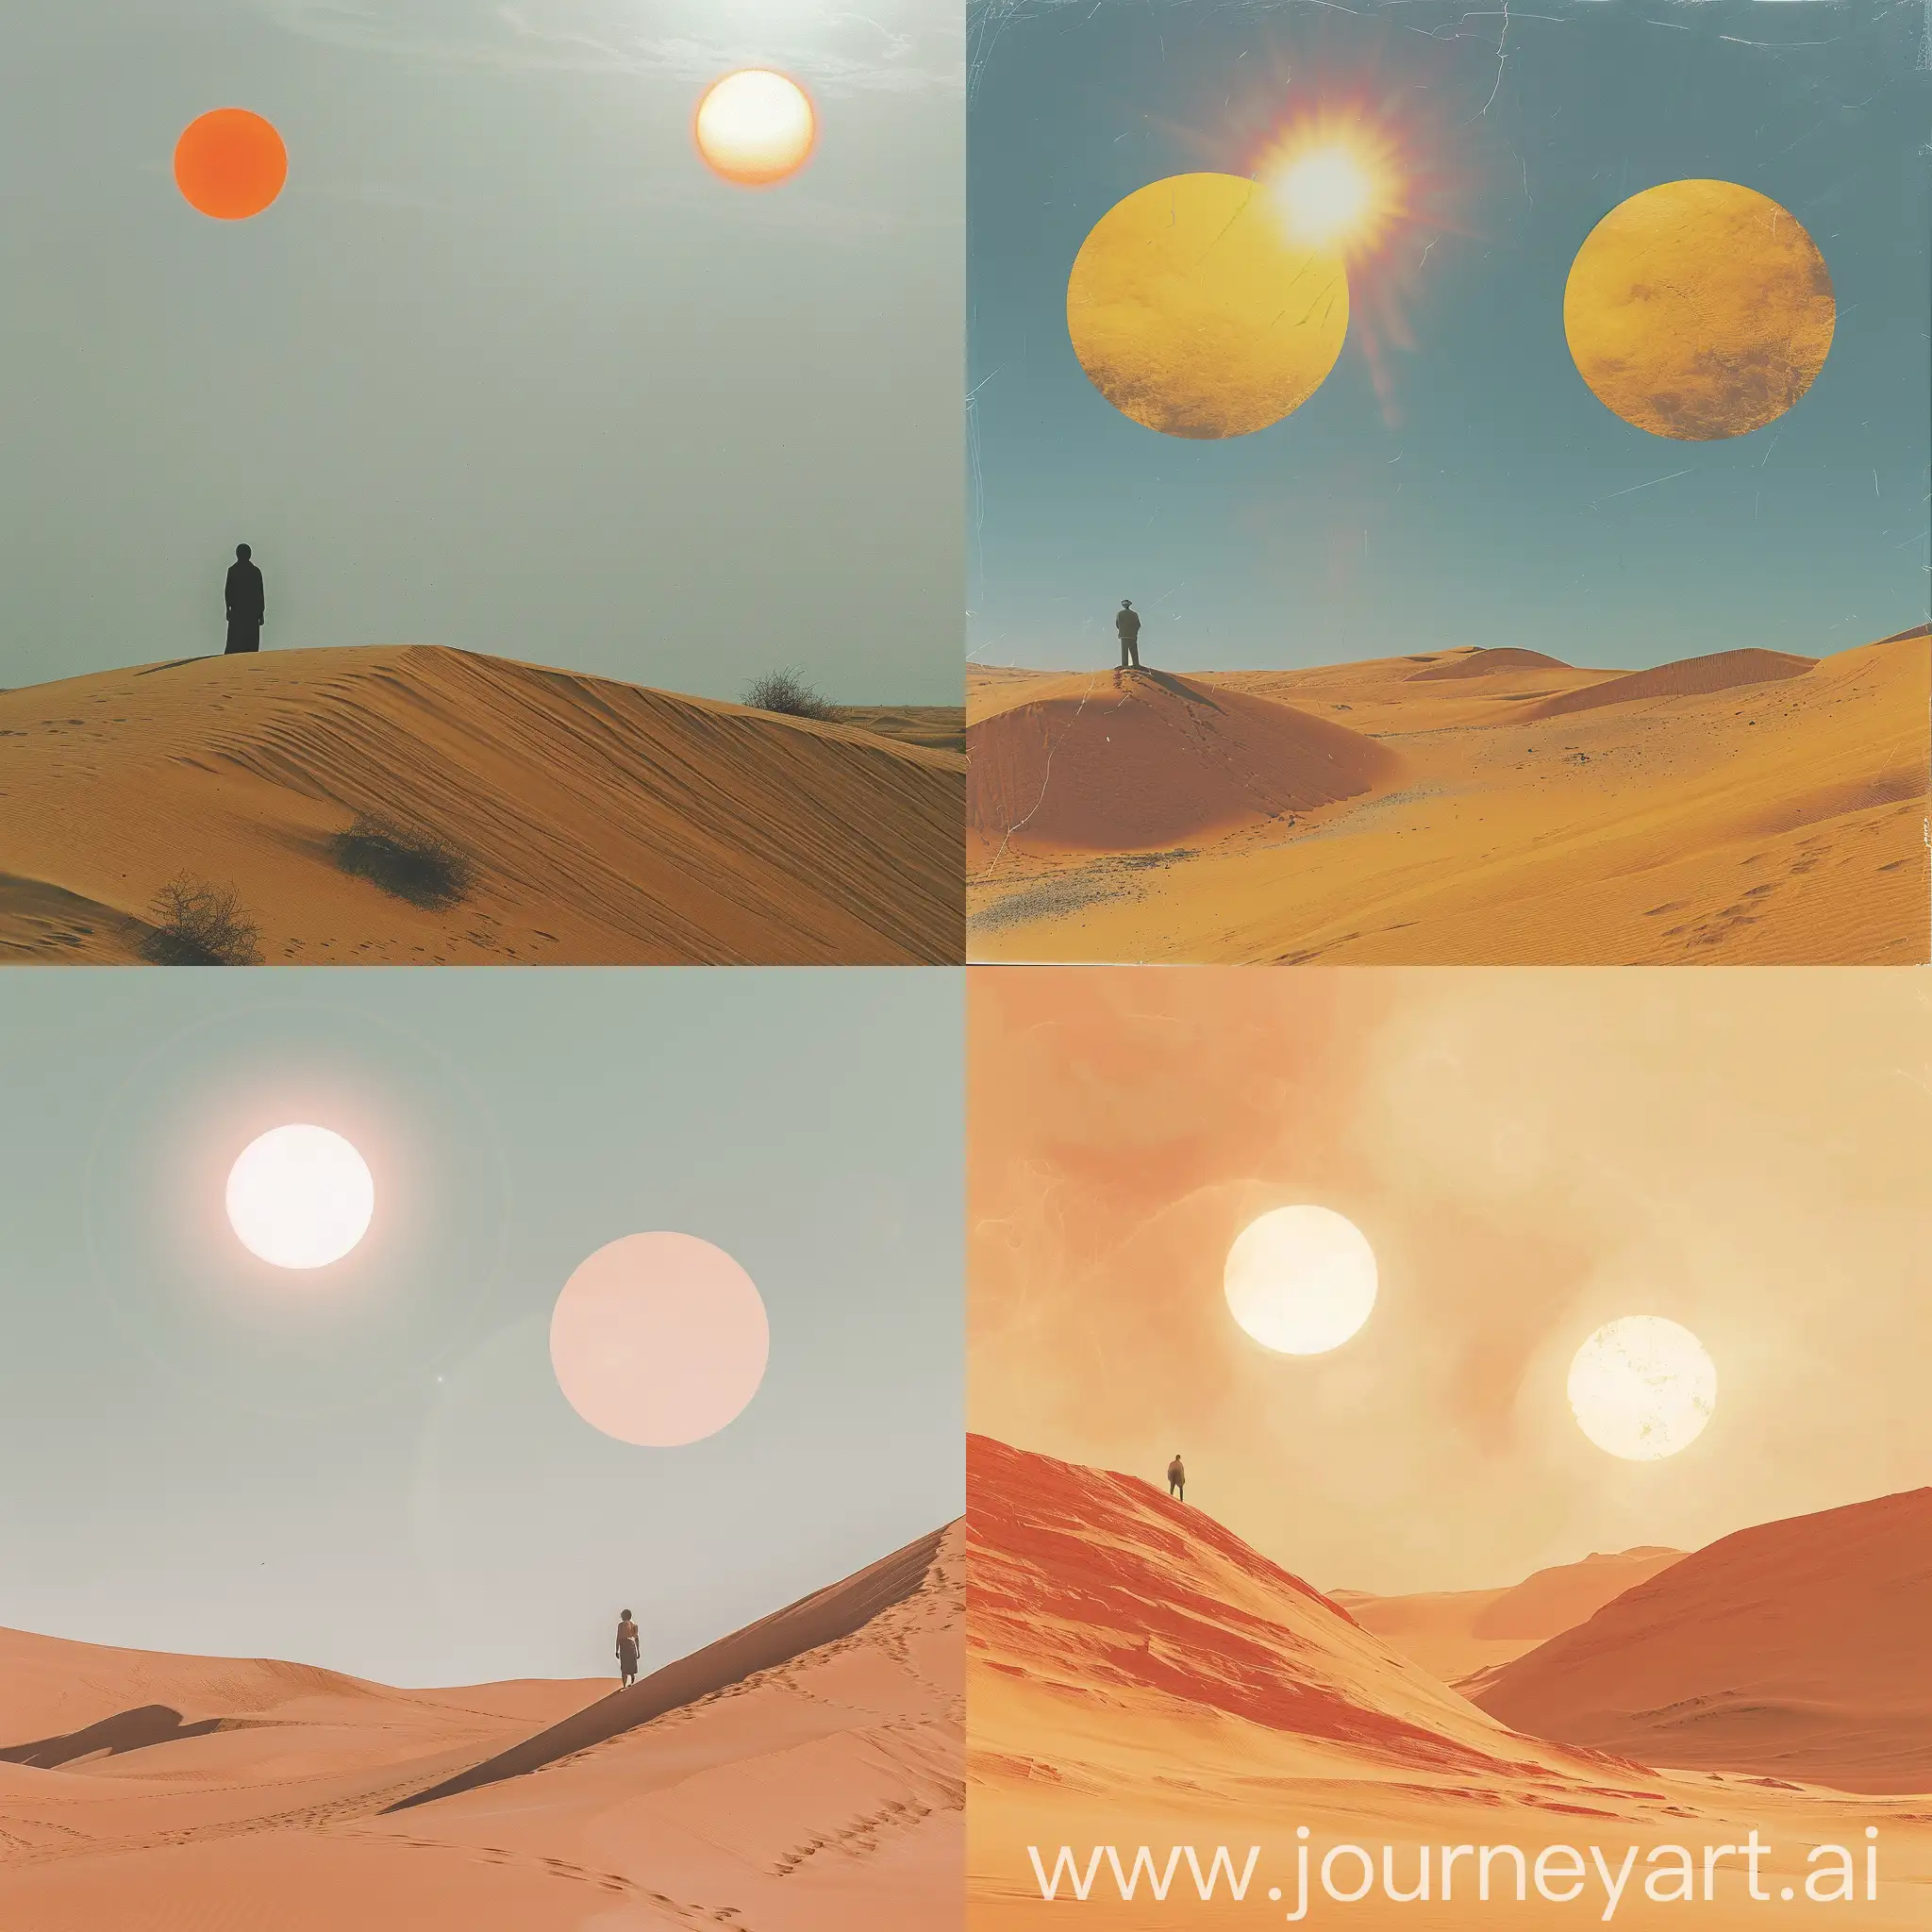 Solitary-Figure-in-Desert-Landscape-with-Twin-Suns